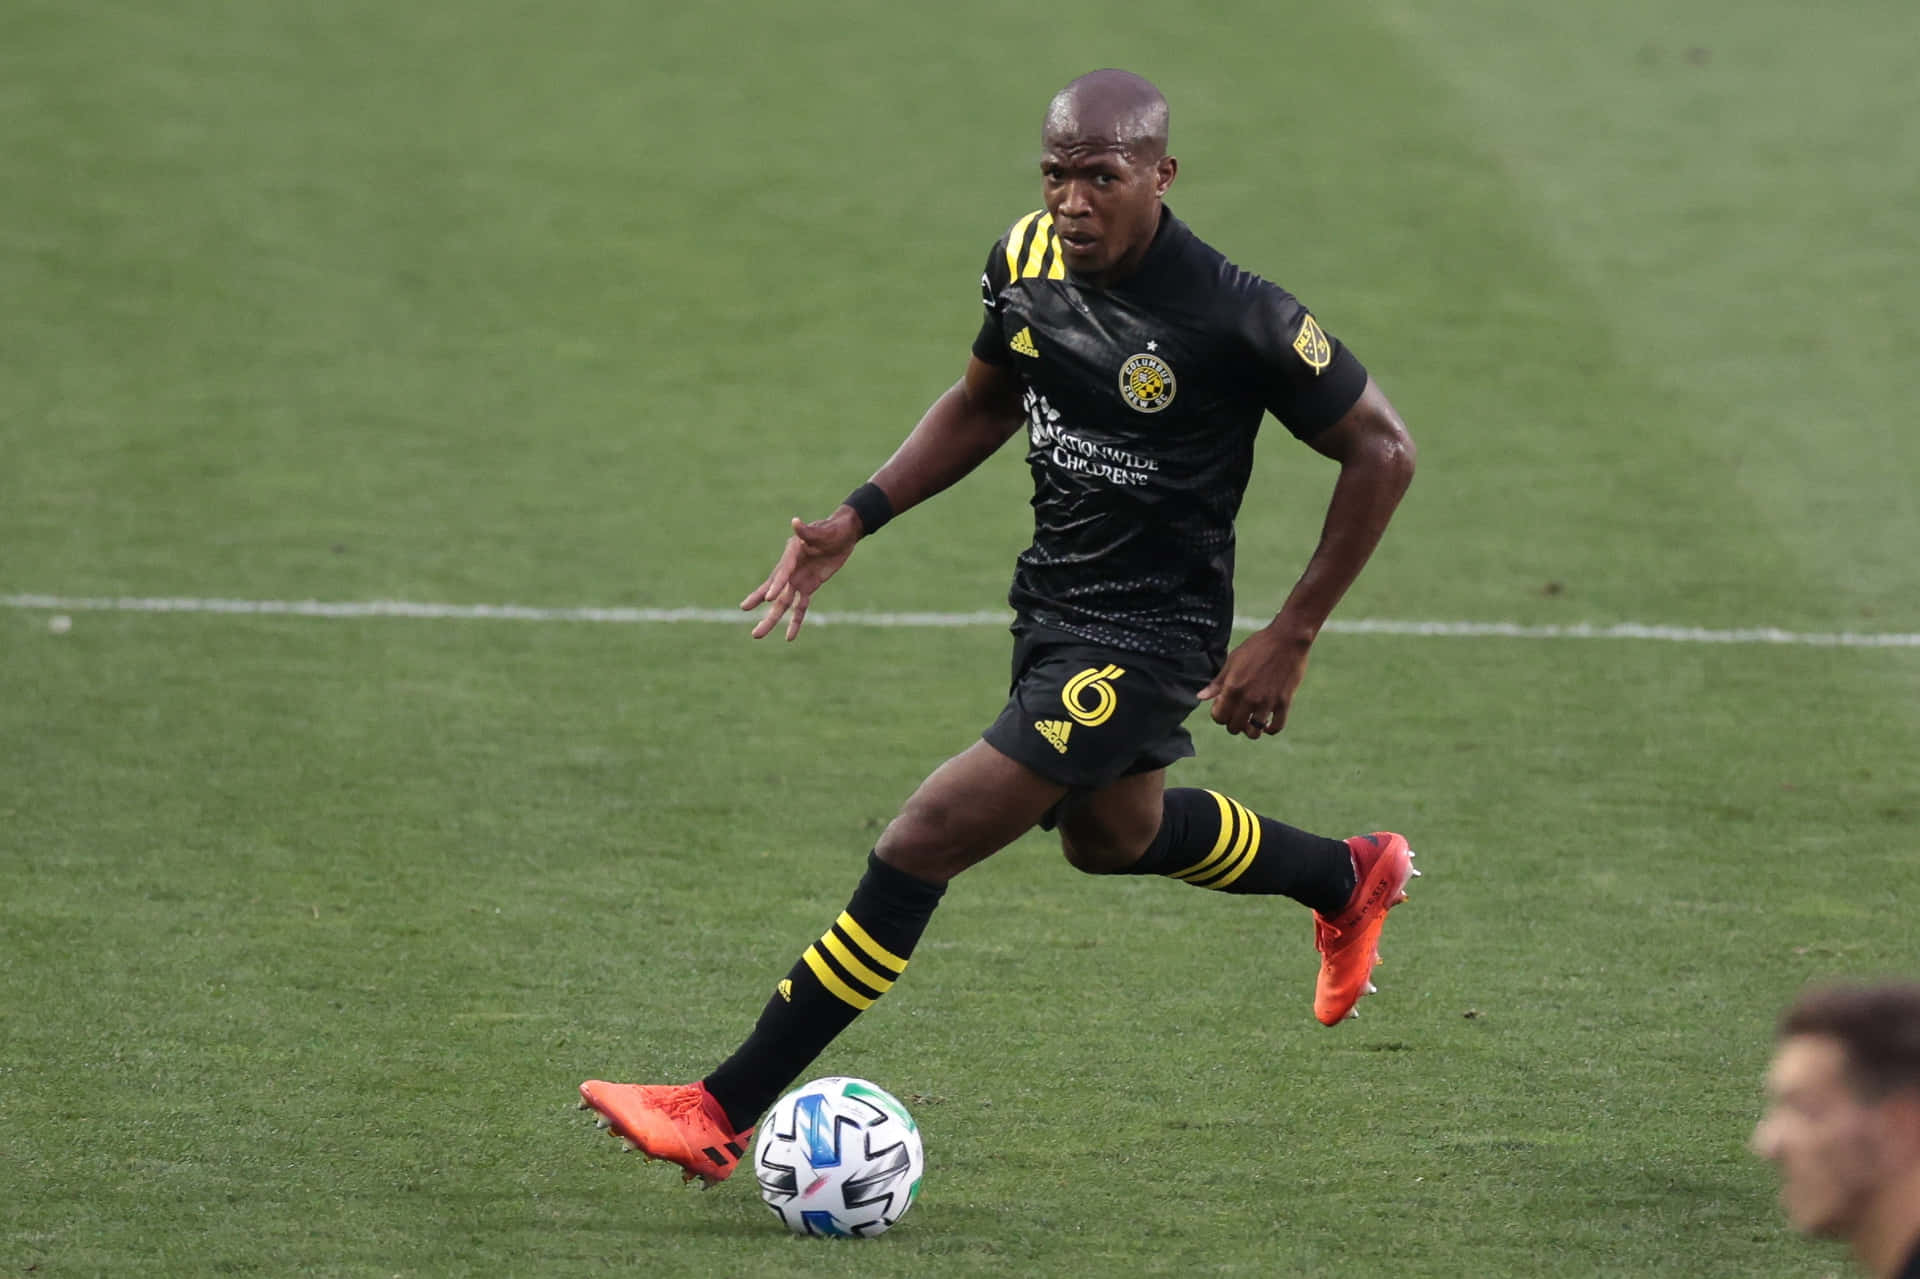 Darlington Nagbe in action, medically cleared and ready for the game Wallpaper